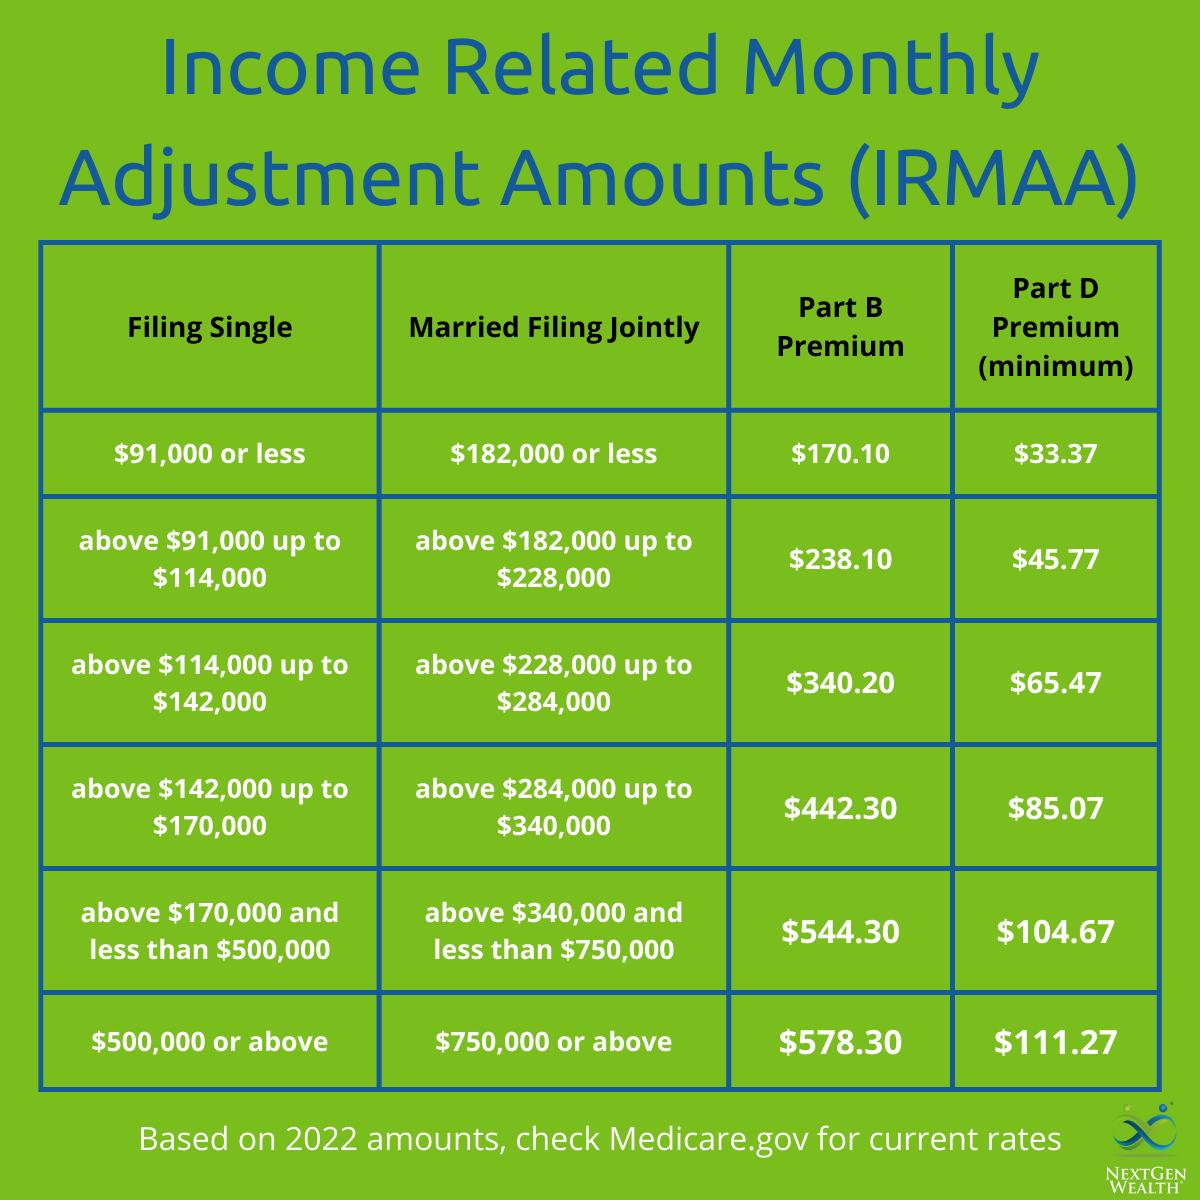 Related Monthly Adjustment Amounts (IRMAA) and Medicare Premiums